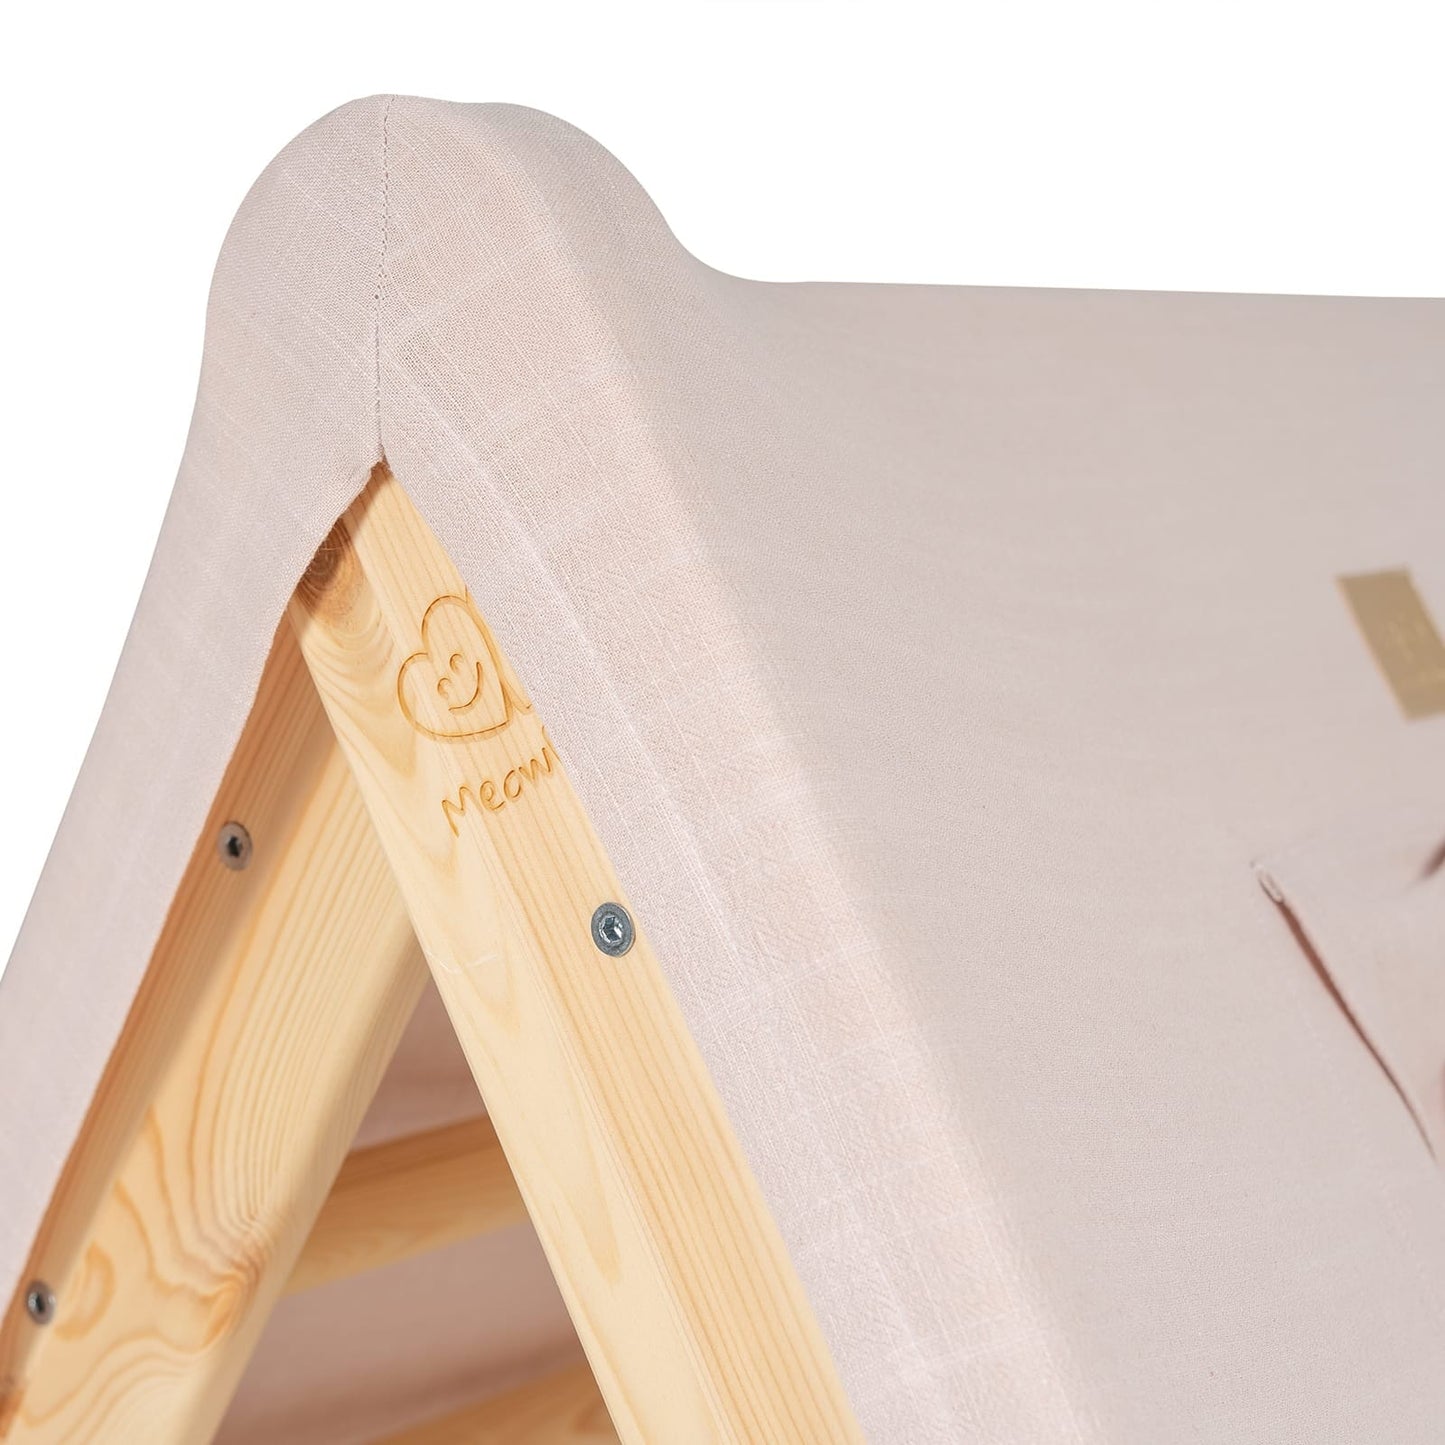 Folding Play House With Ladder For Kids By MeowBaby Pink Natural